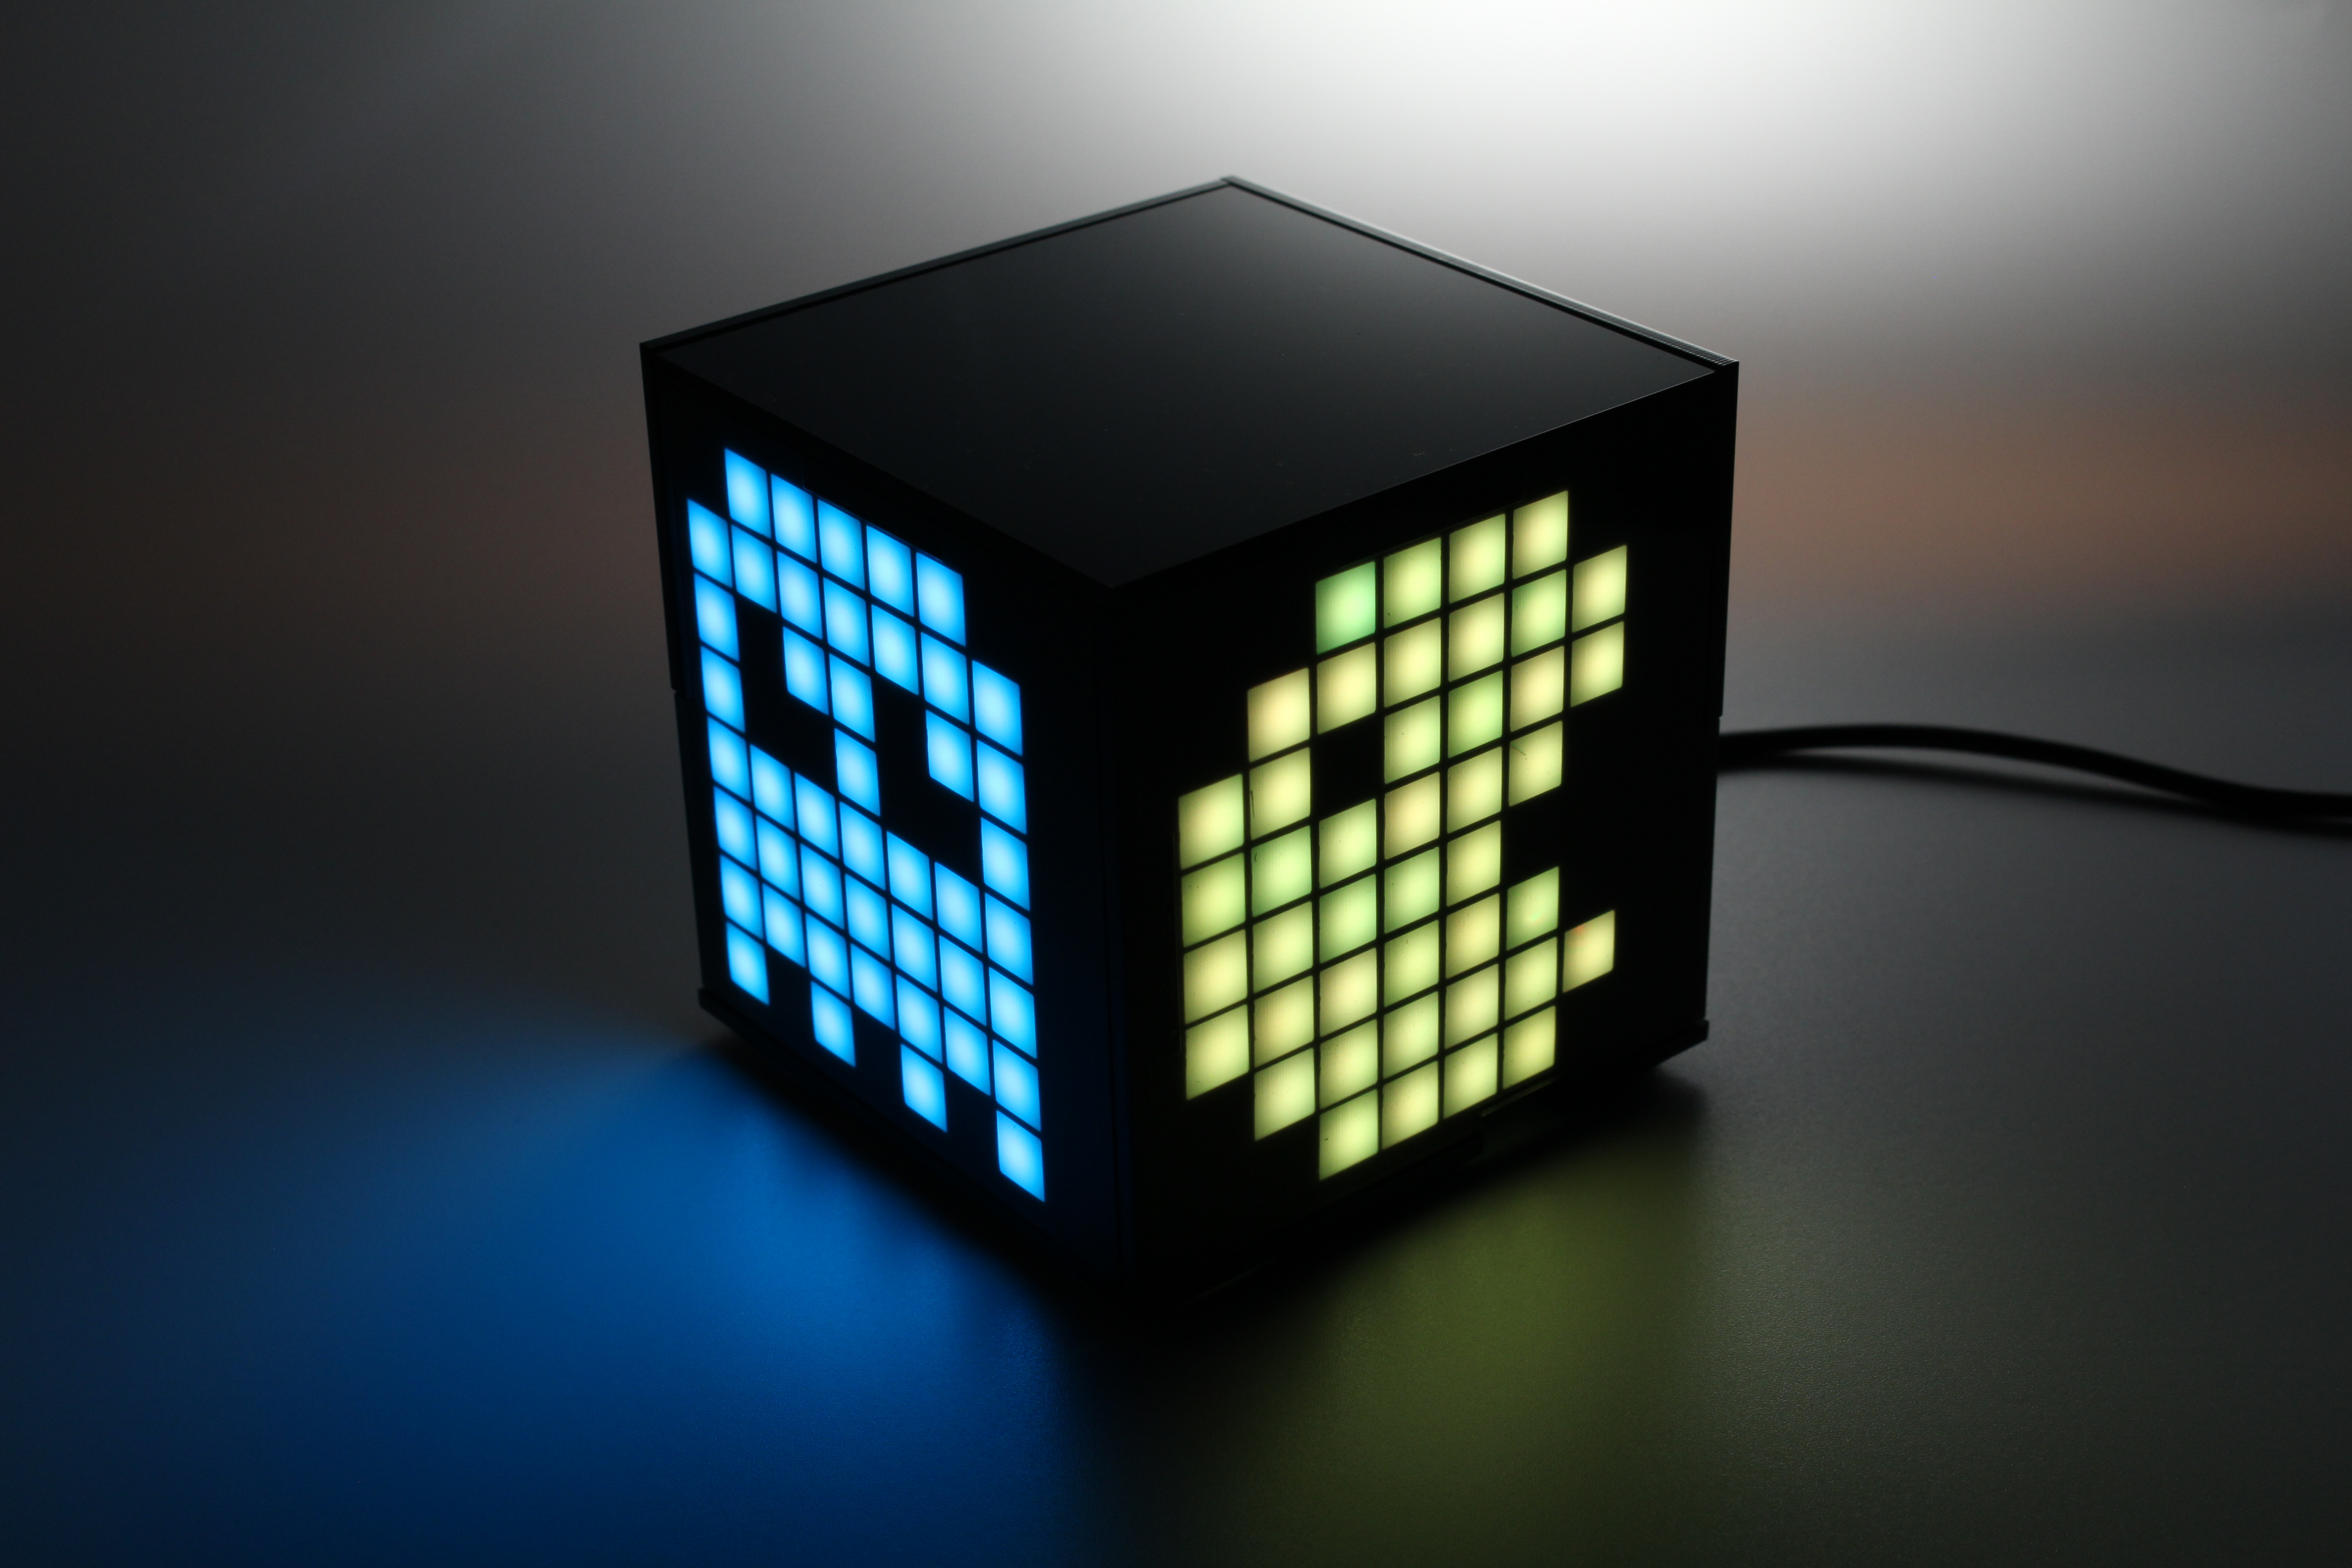 vergeven Stuiteren Koreaans Crowdfunding Watch: A playful LED cube for the Raspberry Pi